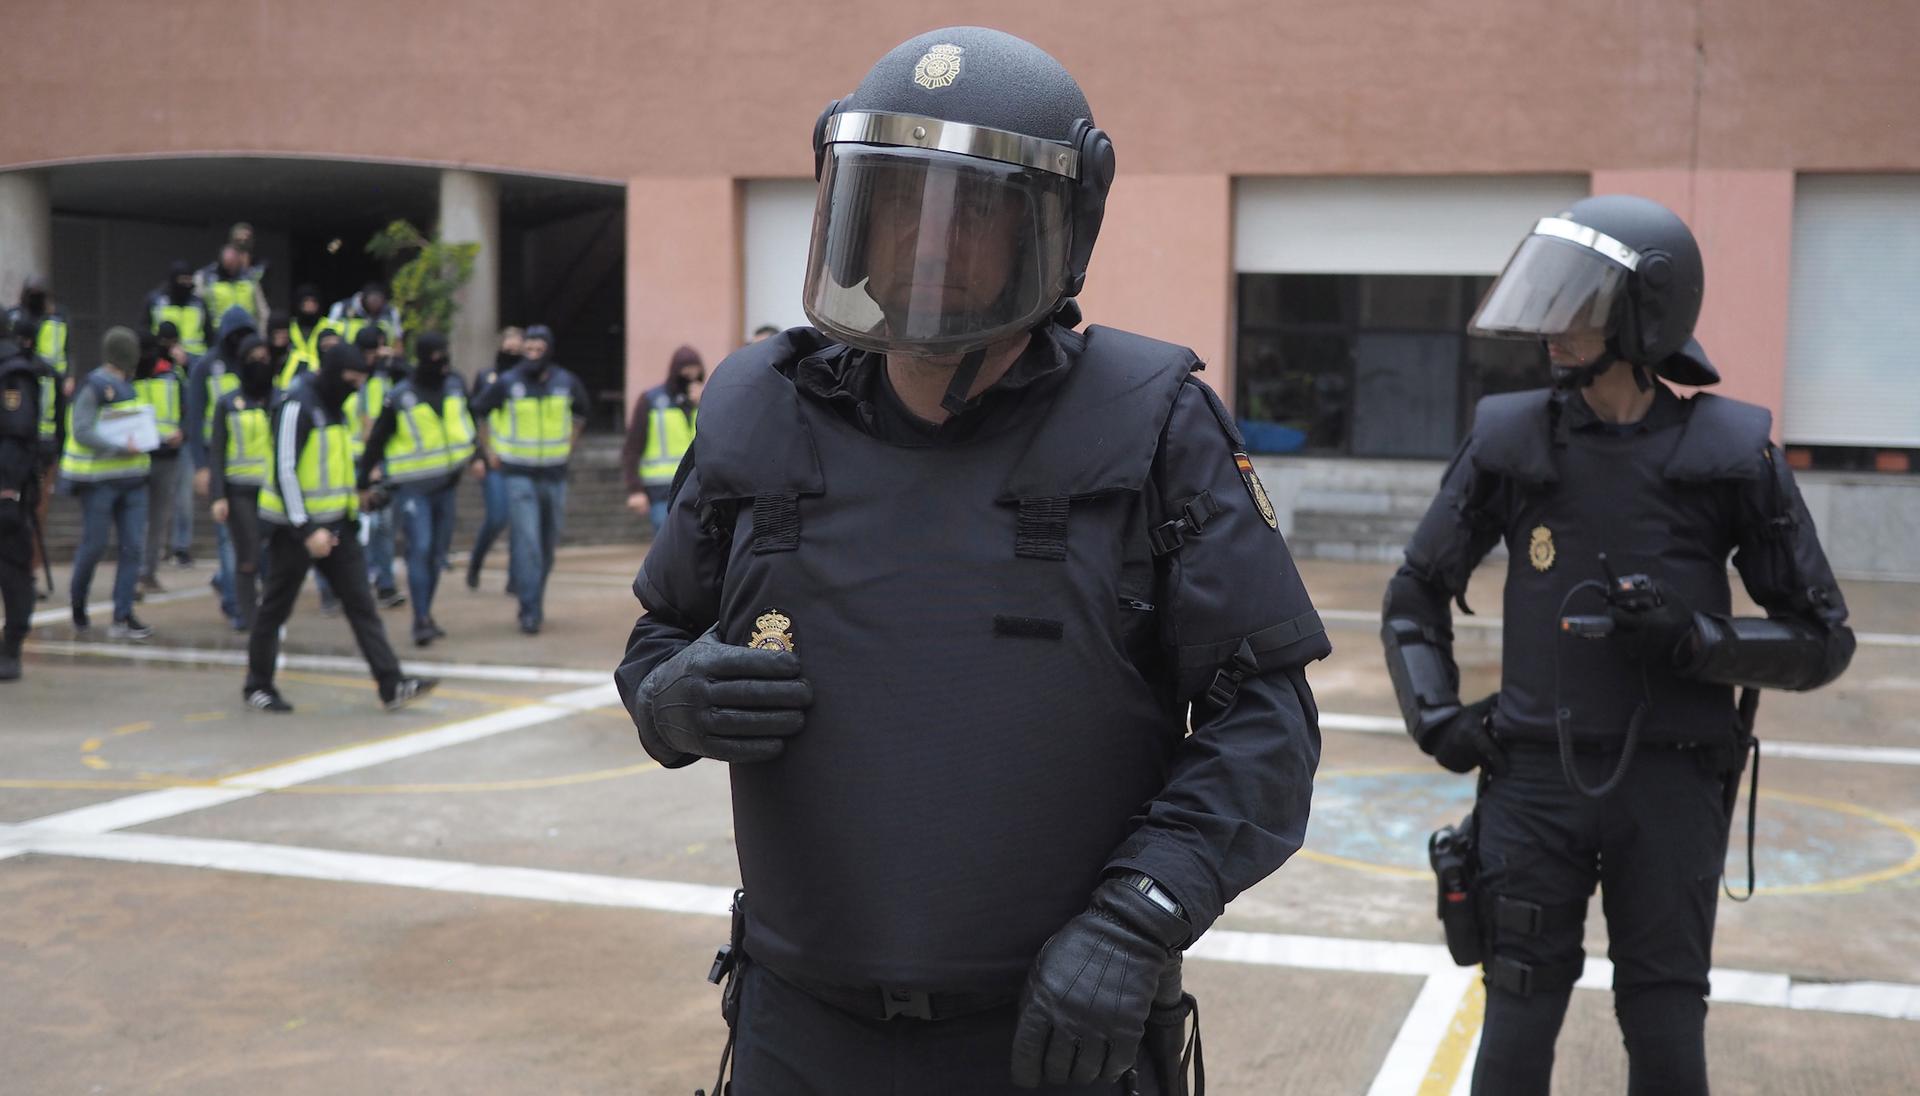 Spanish police arrive at a Barcelona school where Catalan independence voting was taking place.